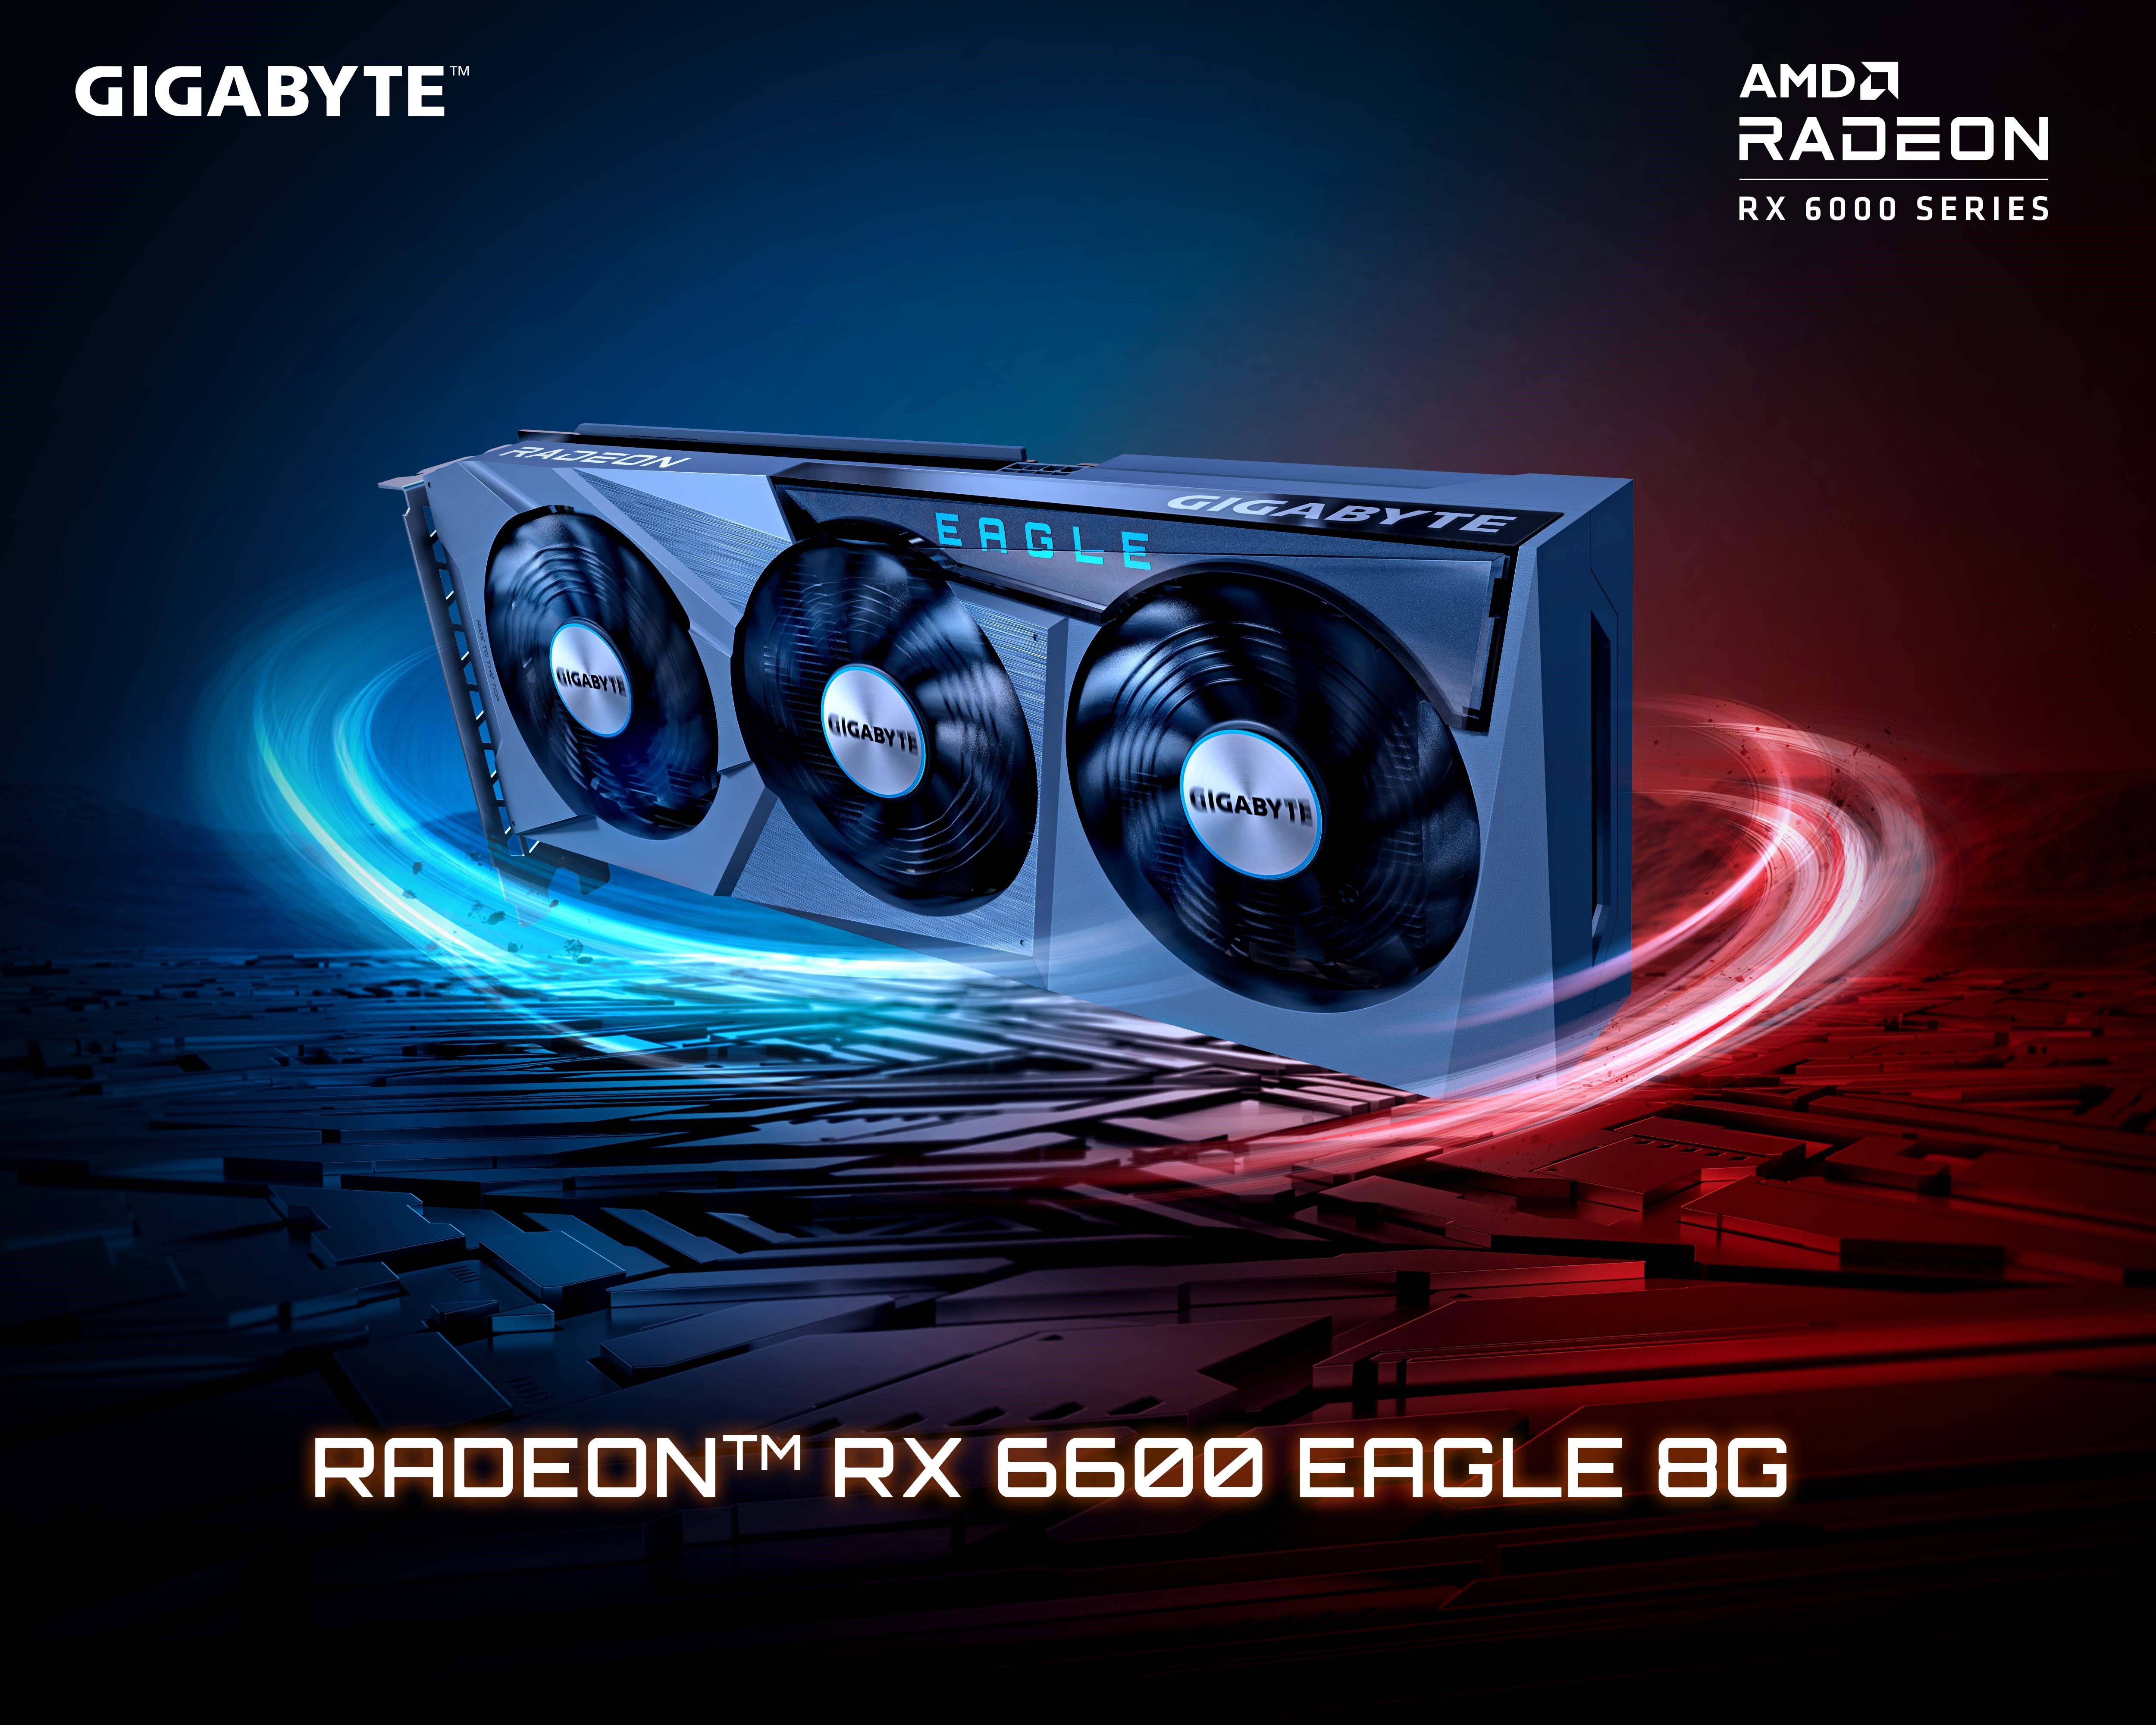 GIGABYTE Launches AMD Radeon™ RX 6600 EAGLE 8G Graphics Card